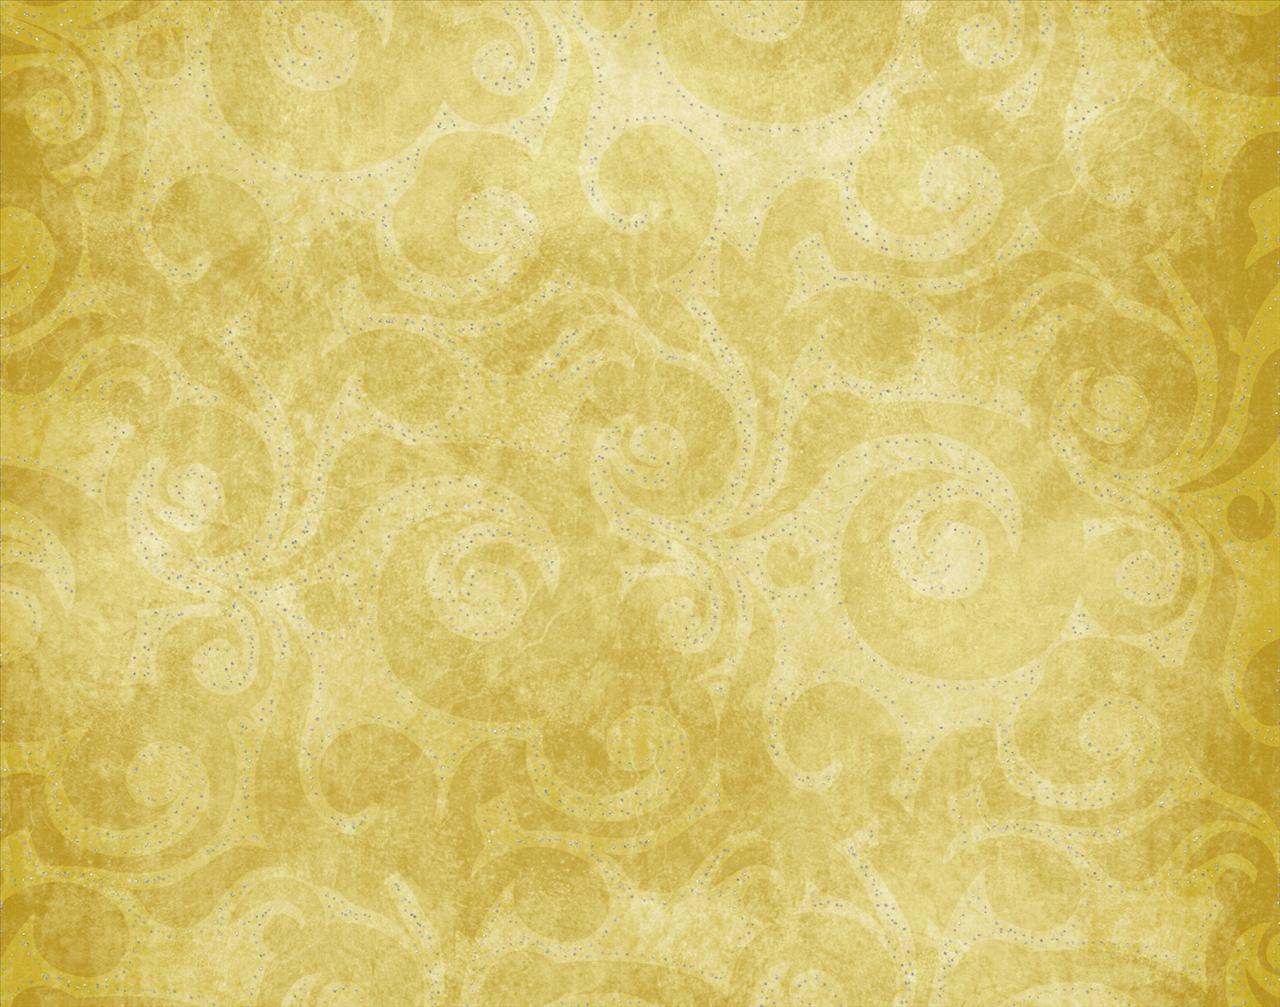 Glowing Golden Background Wallpaper For Powerpoint Presentations